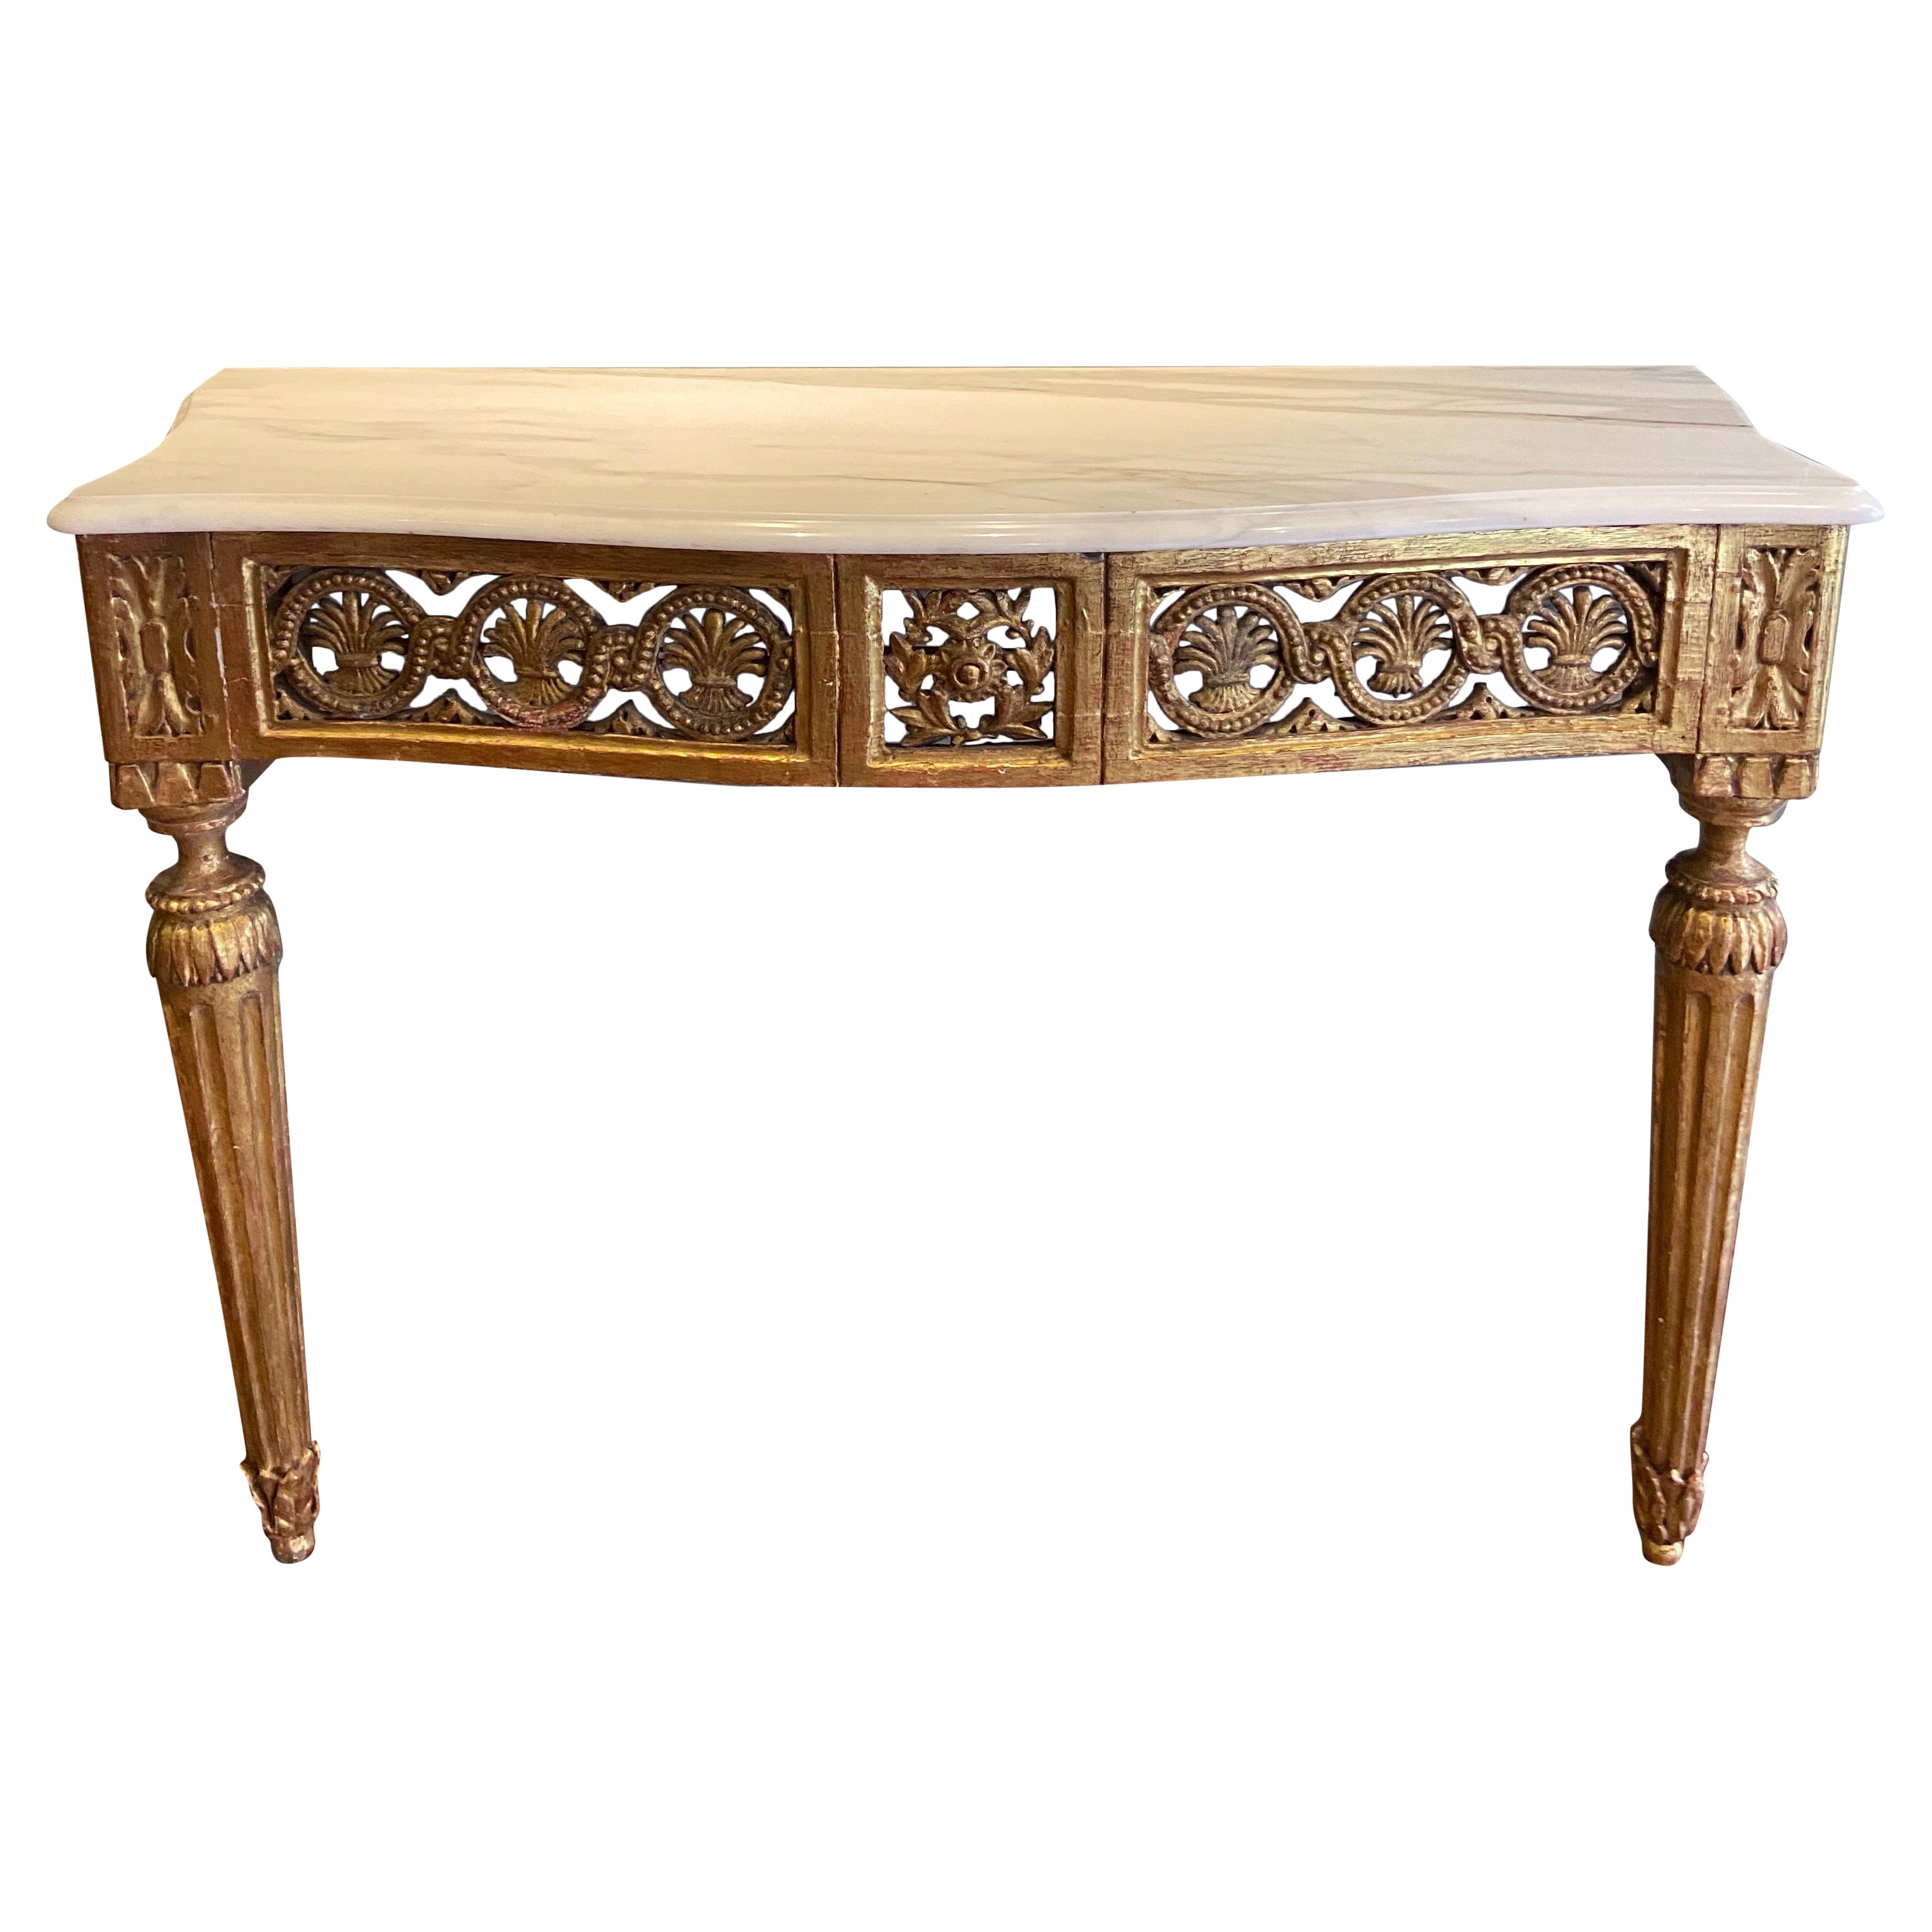 Northern Italian Serpentine Carved Gilt-Wood Console Table 'Late 18th Century' For Sale